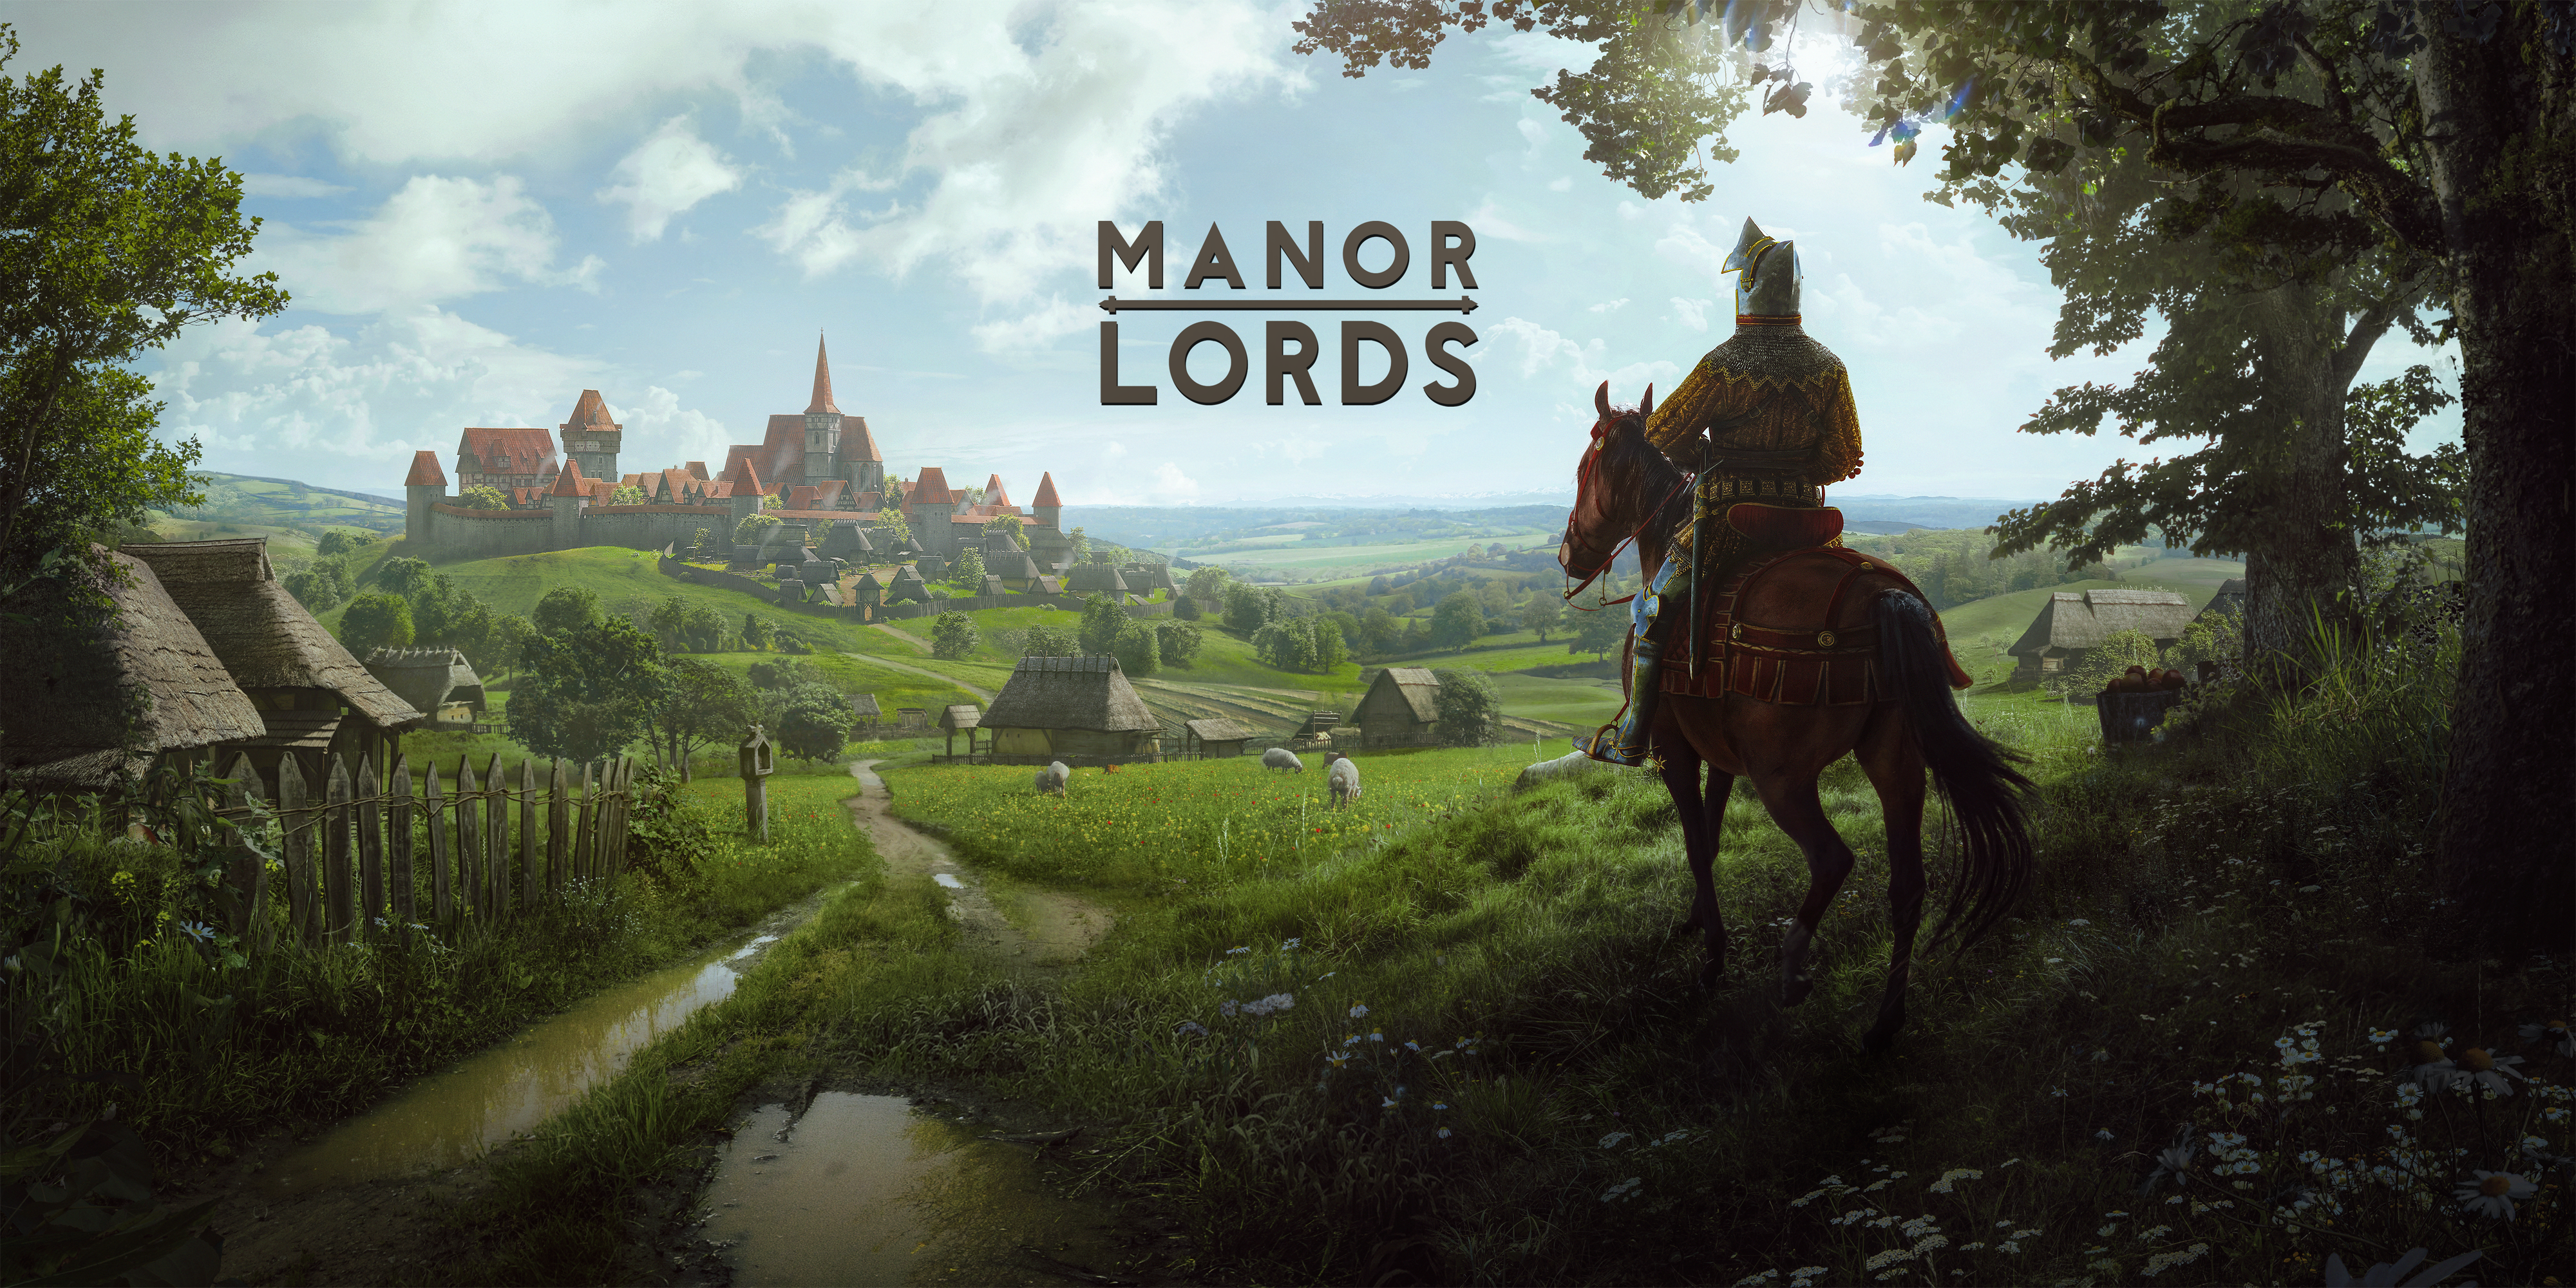 Manor Lords final key art with logo